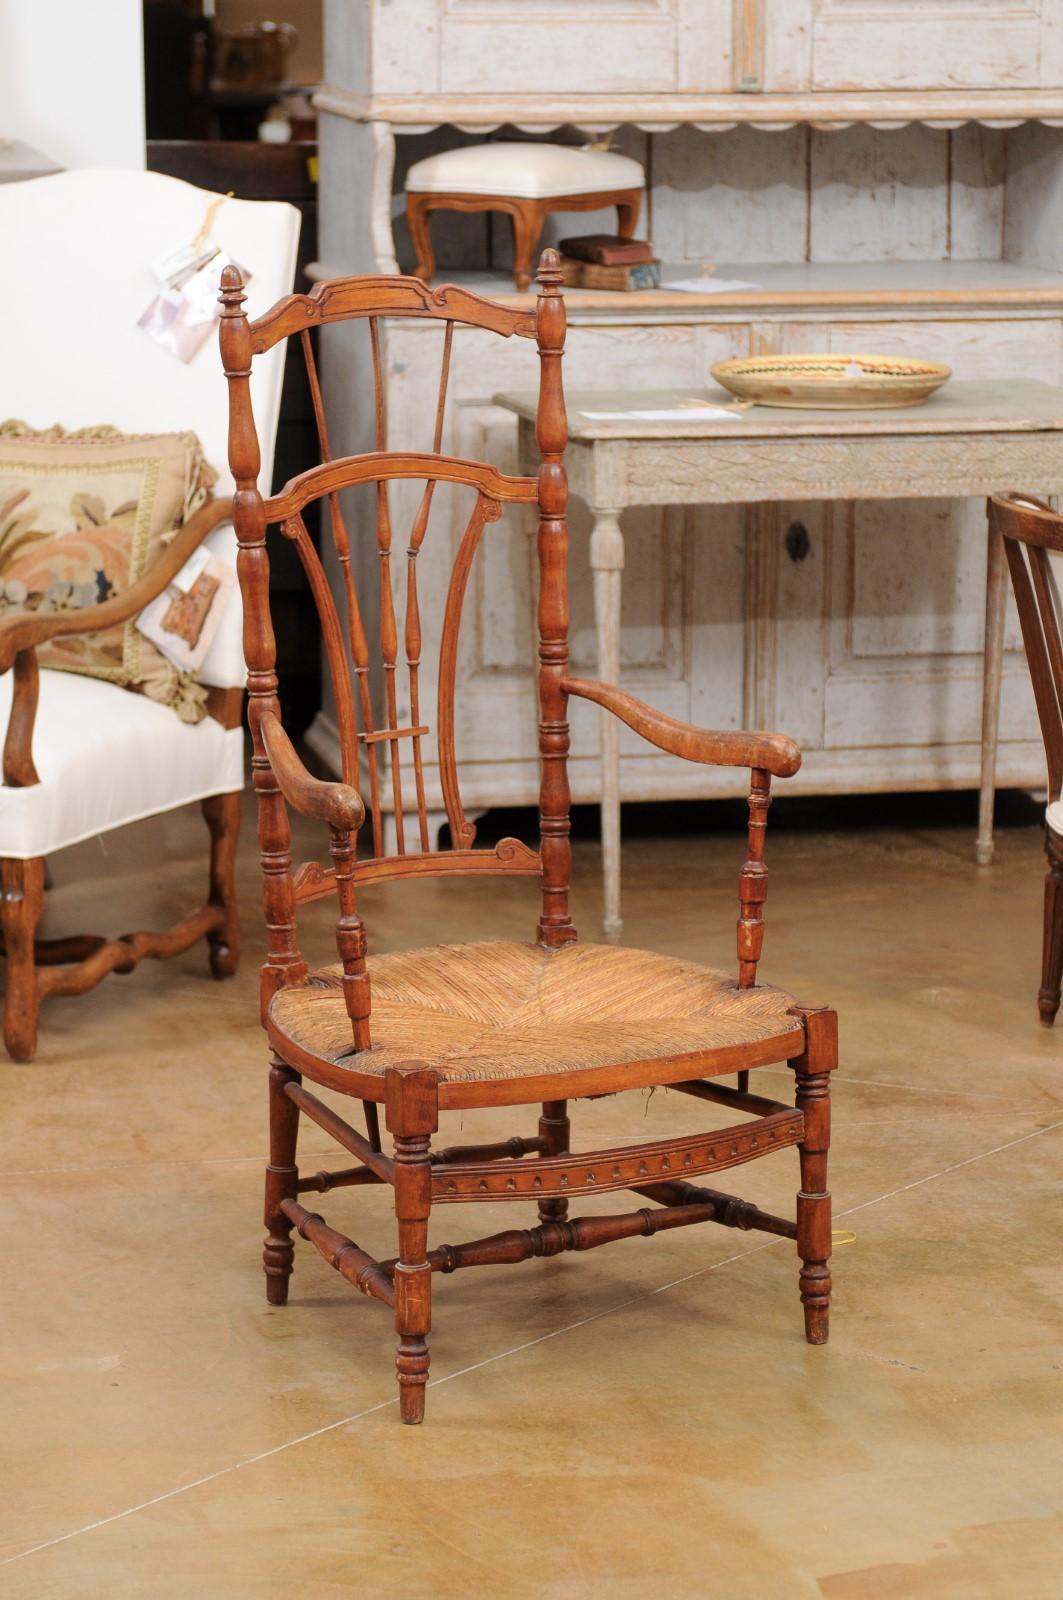 A rustic French cherry wood armchair from the late 19th century, with rush seat and sheaf back. Created in France during the last decade of the 19th century, this cherry wood armchair charms us with its rustic appeal and turned accents. The chair